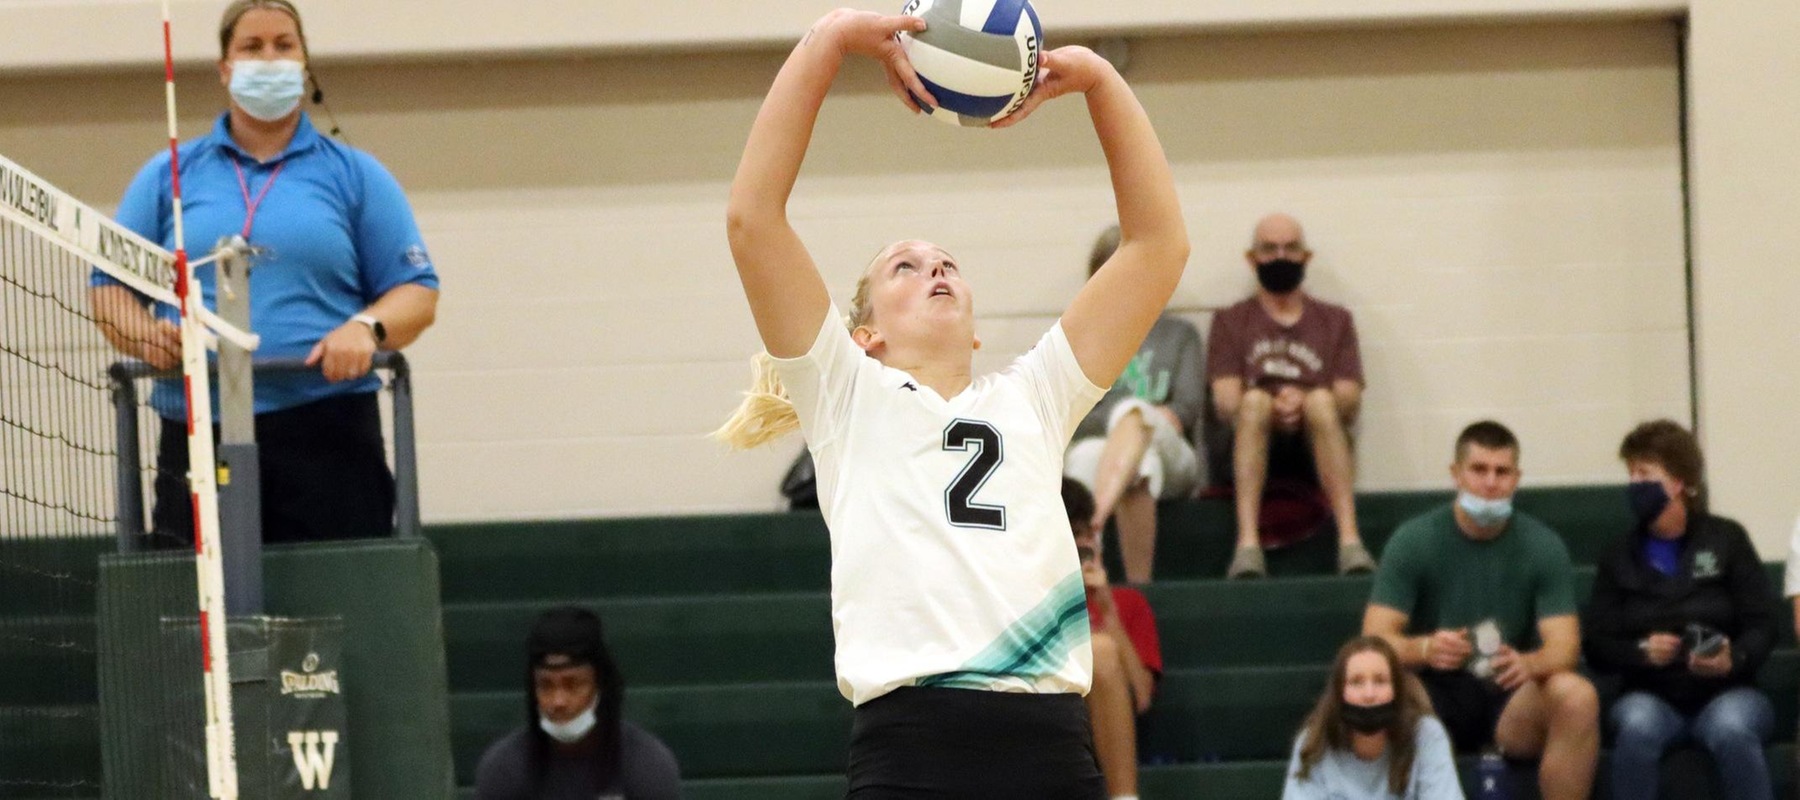 Photo of Heather Pedrick who had a triple double in all three matches of the 2021 Wildcat Regional Invitational. Copyright 2021; Wilmington University. All rights reserved. Photo by Dan Lauletta. September 21, 2021 vs. Saint Rose.